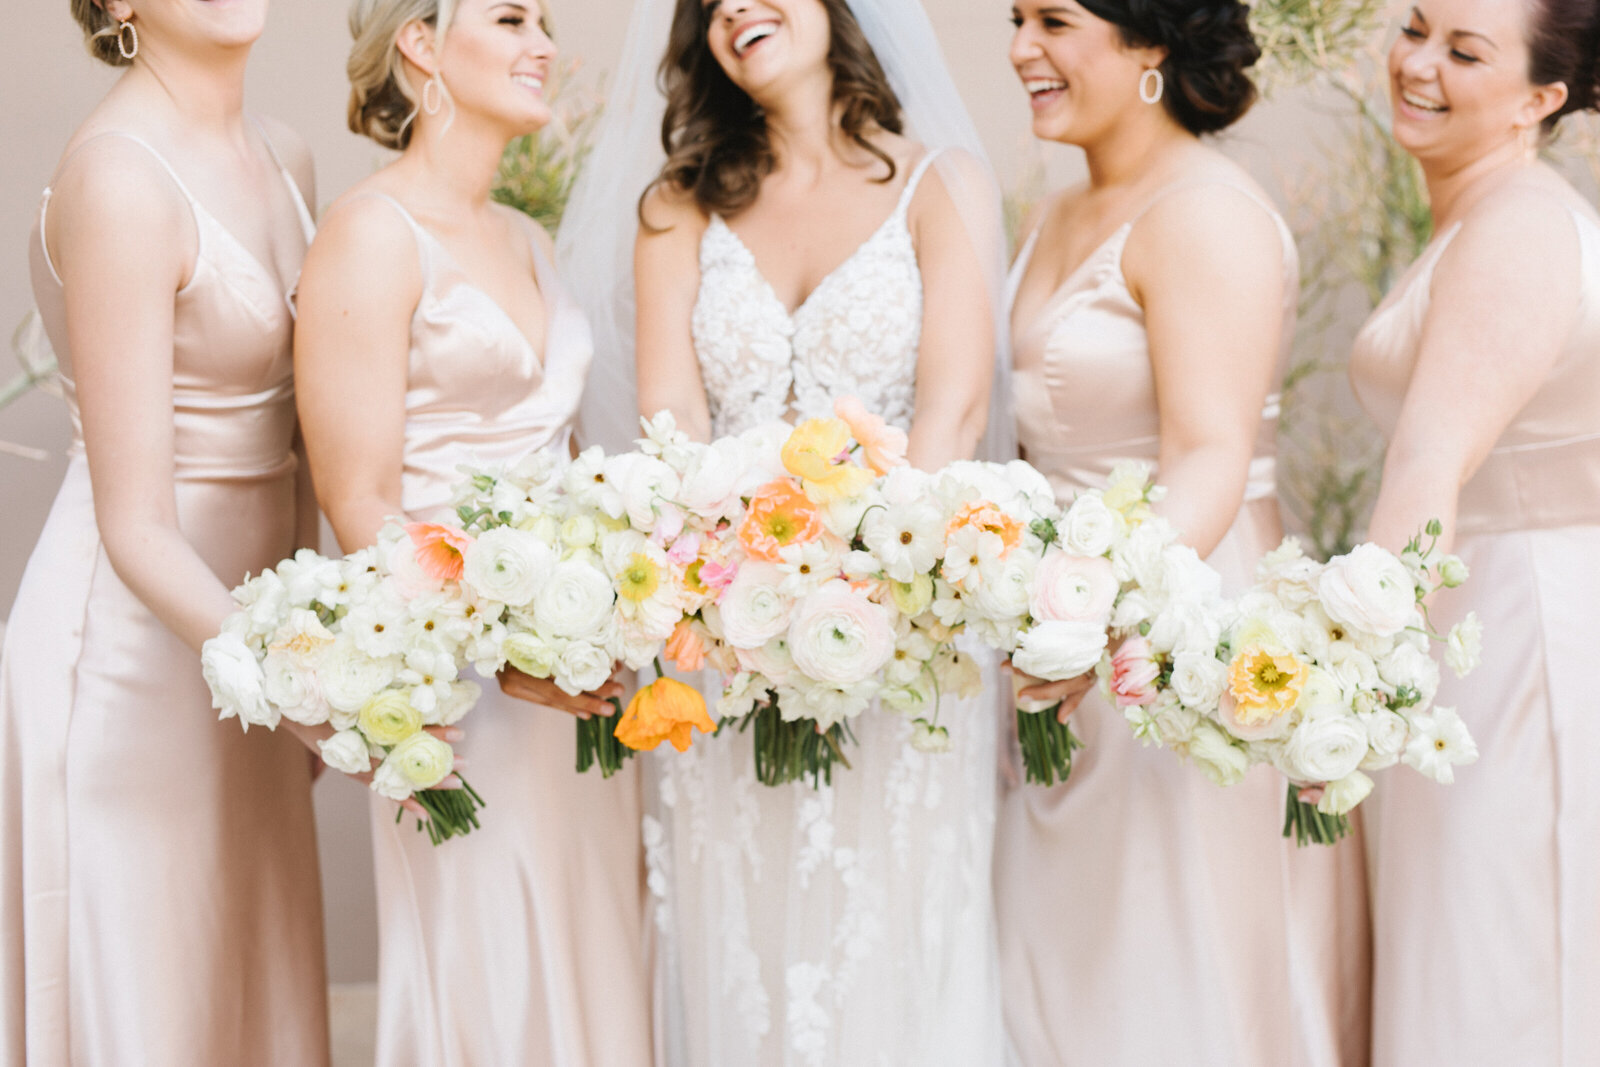 Bride and bridesmaids with matching bouquets and cream dresses.